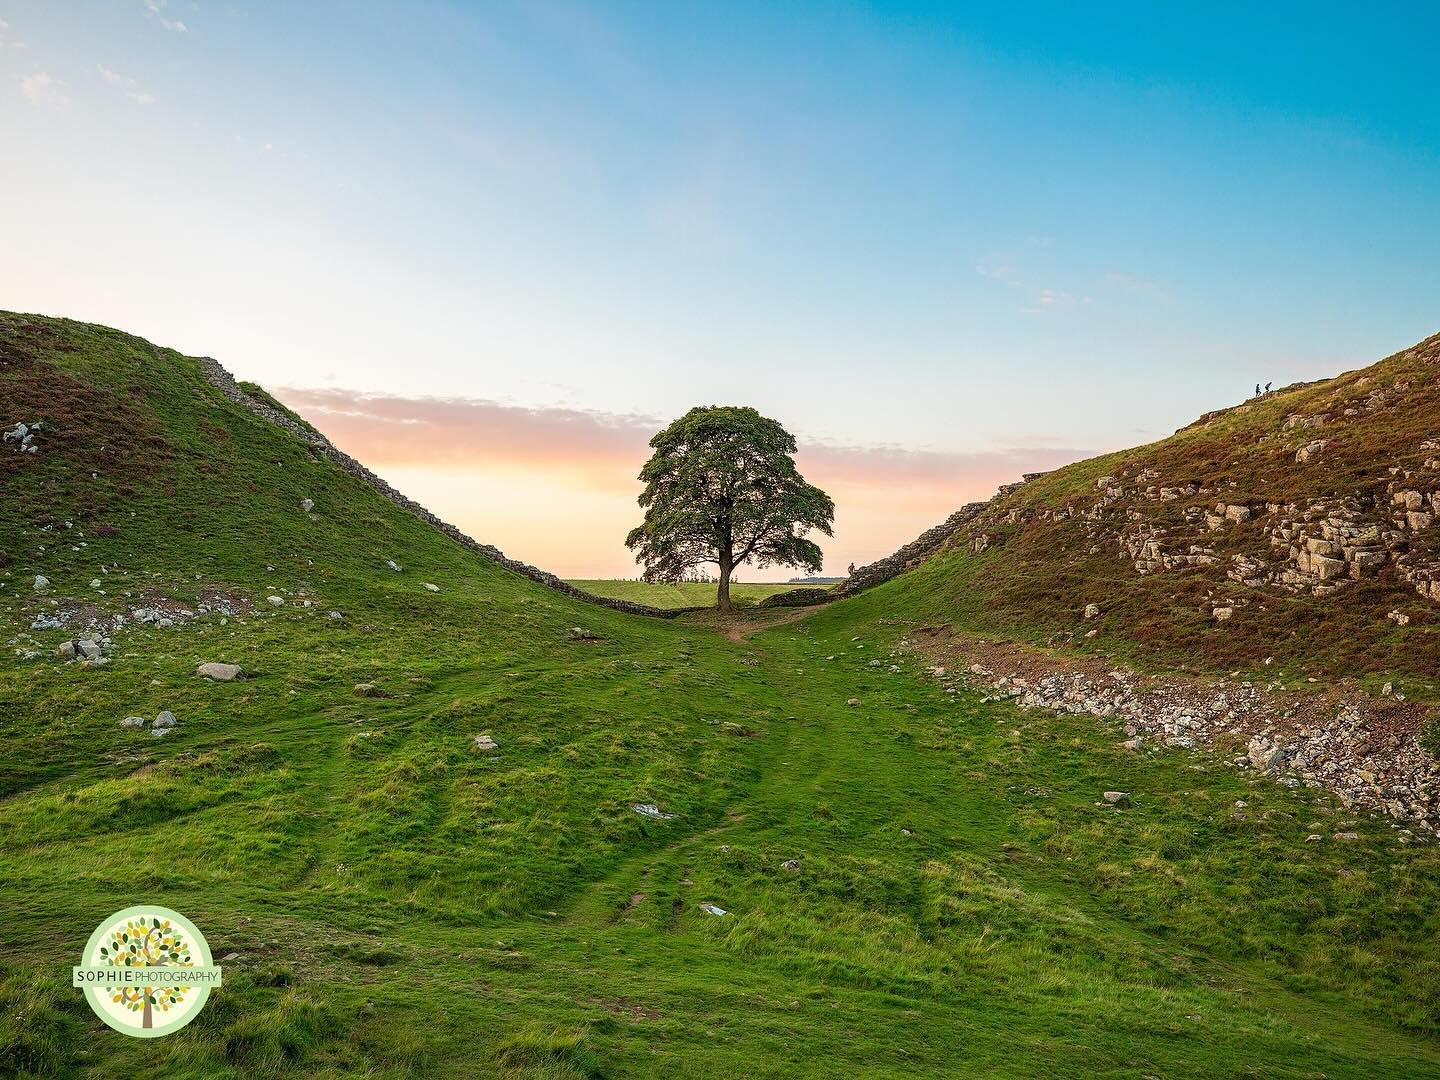 7 months ago the North East and millions of others around the world were devastated to hear one or most loved and iconic landmarks, Sycamore Gap, was mindlessly cut down overnight.⁣
As many of you will have now heard, yesterday 2 men were charged wit